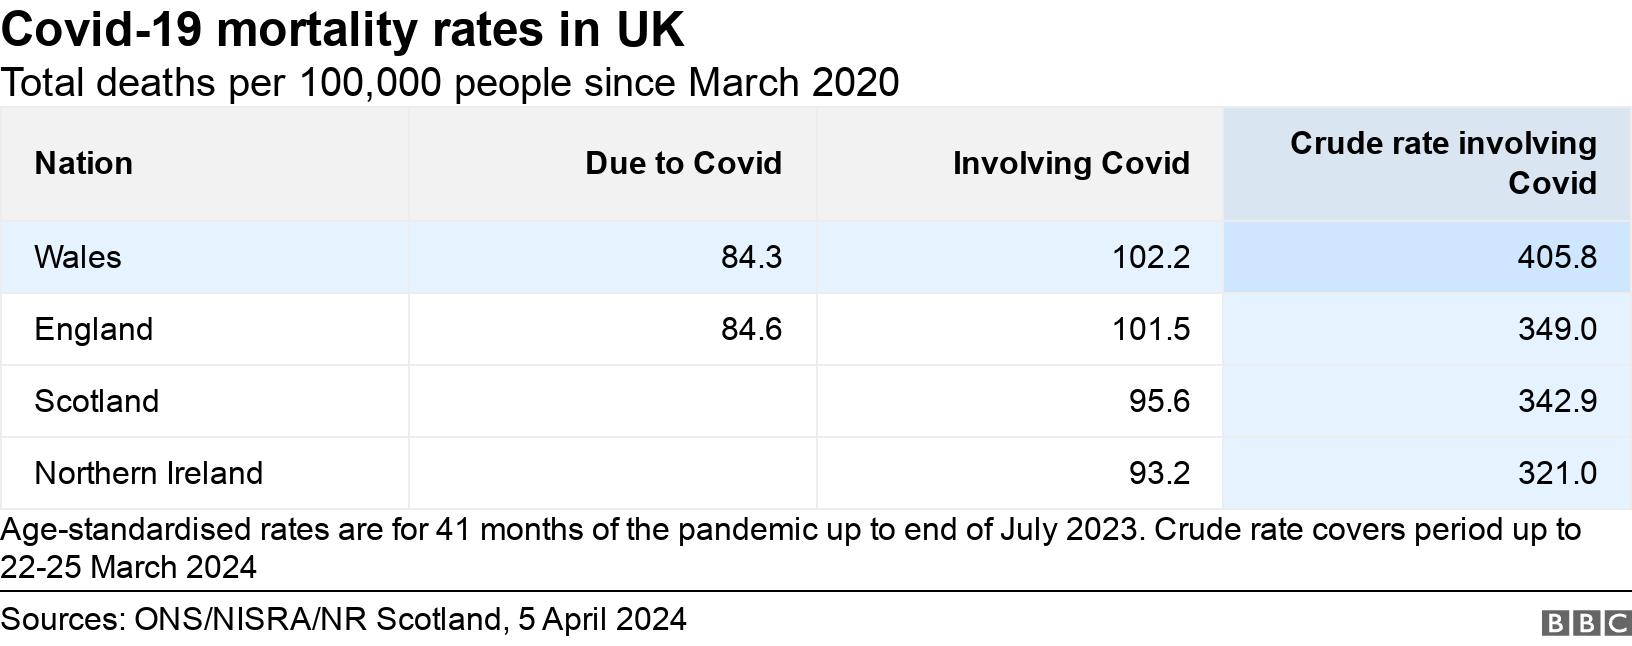 Covid-19 mortality rates in UK. Total deaths per 100,000 people since March 2020.  Age-standardised rates are for 41 months of the pandemic up to end of July 2023. Crude rate covers period up to 22-25 March 2024.